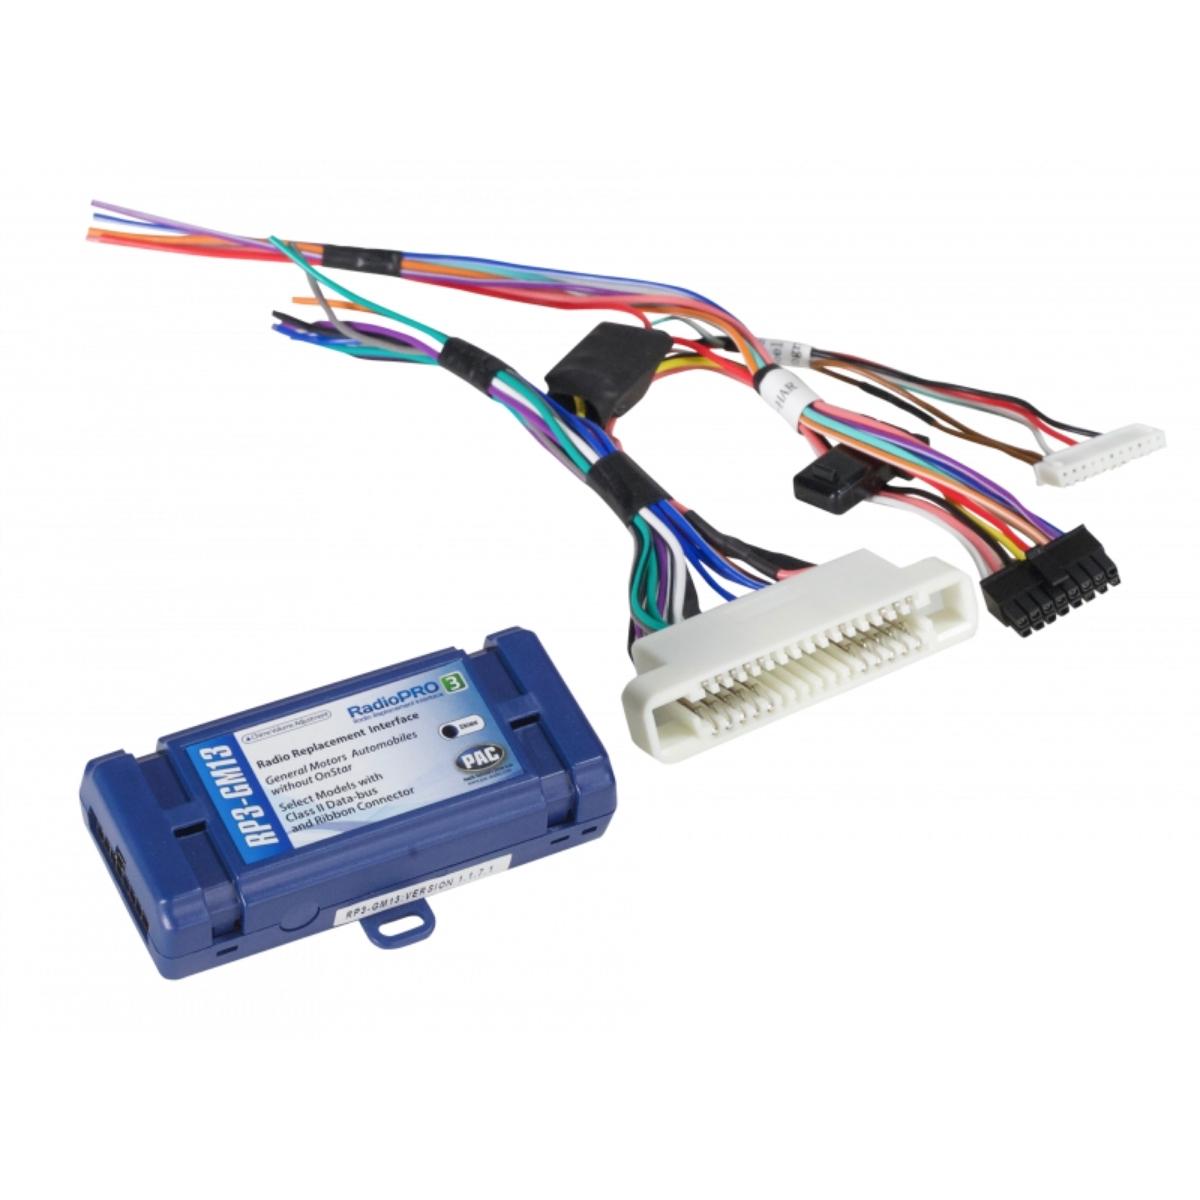 RP3-GM13 RadioPRO3 Interface for Select GM Class II Vehicles